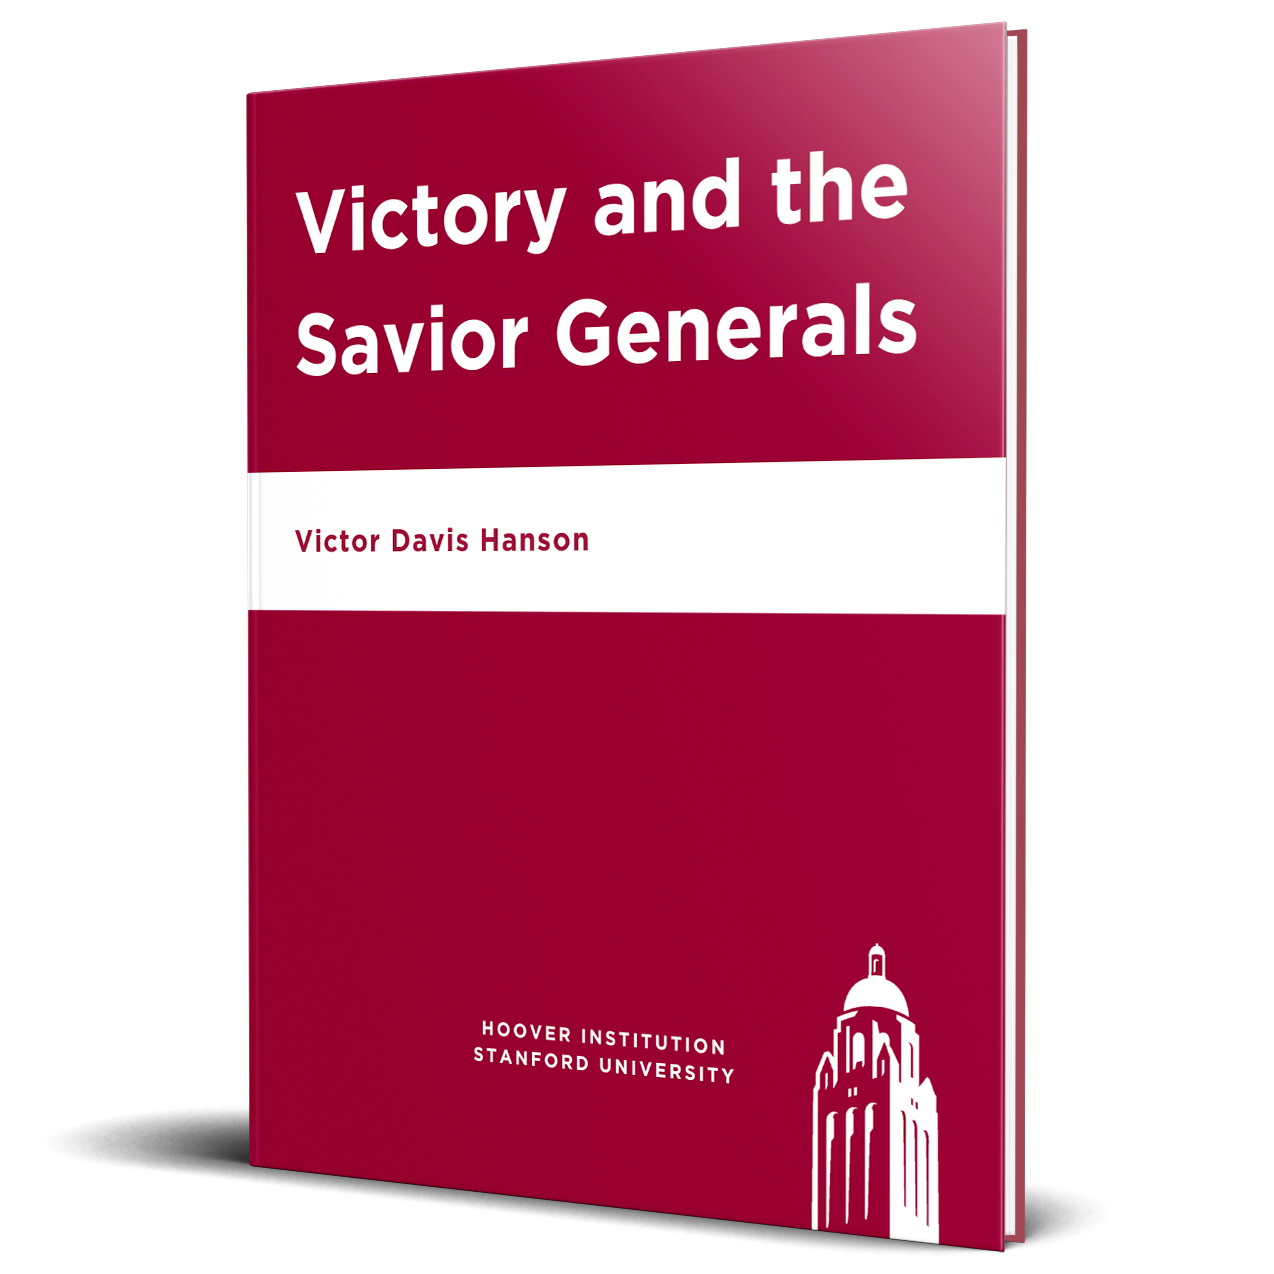 Victory and the Savior Generals